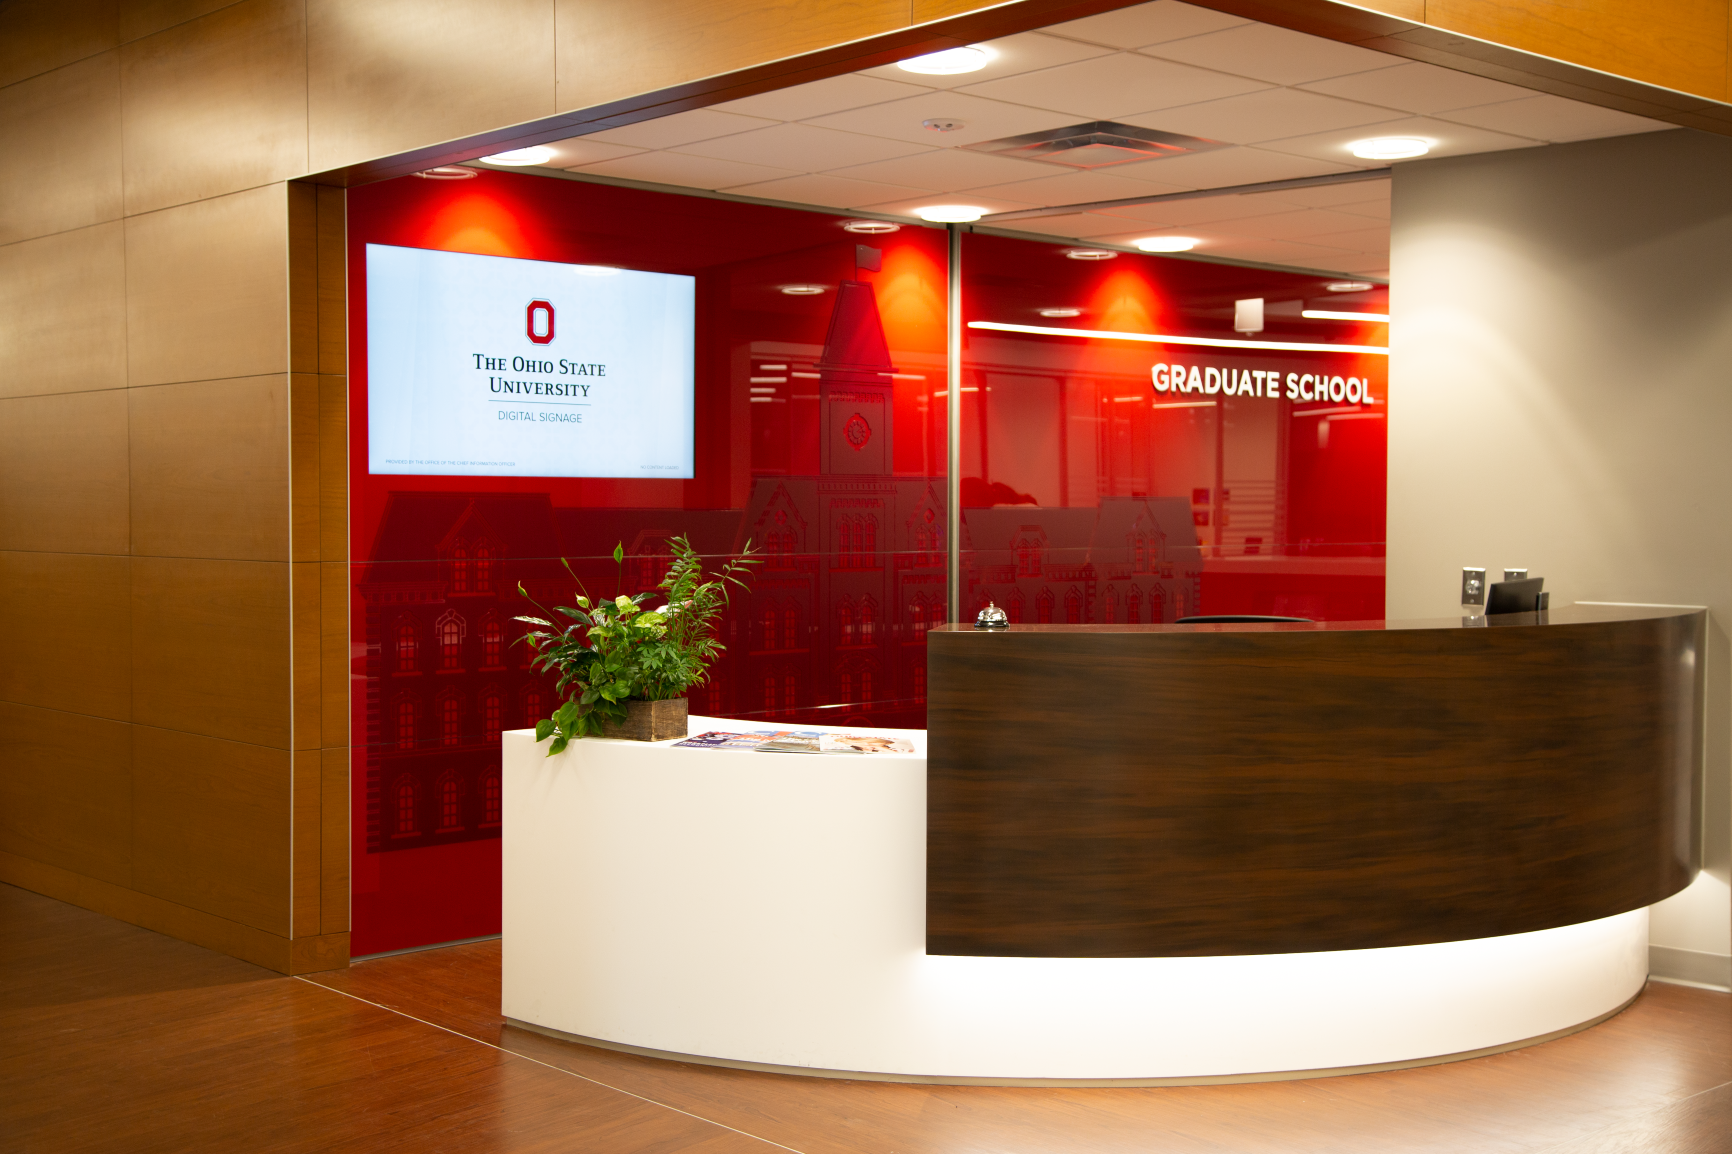 Custom DIRTT applications with integrated technology and custom branding greets guests at the Graduate School in University Hall at The Ohio State University by Continental Office